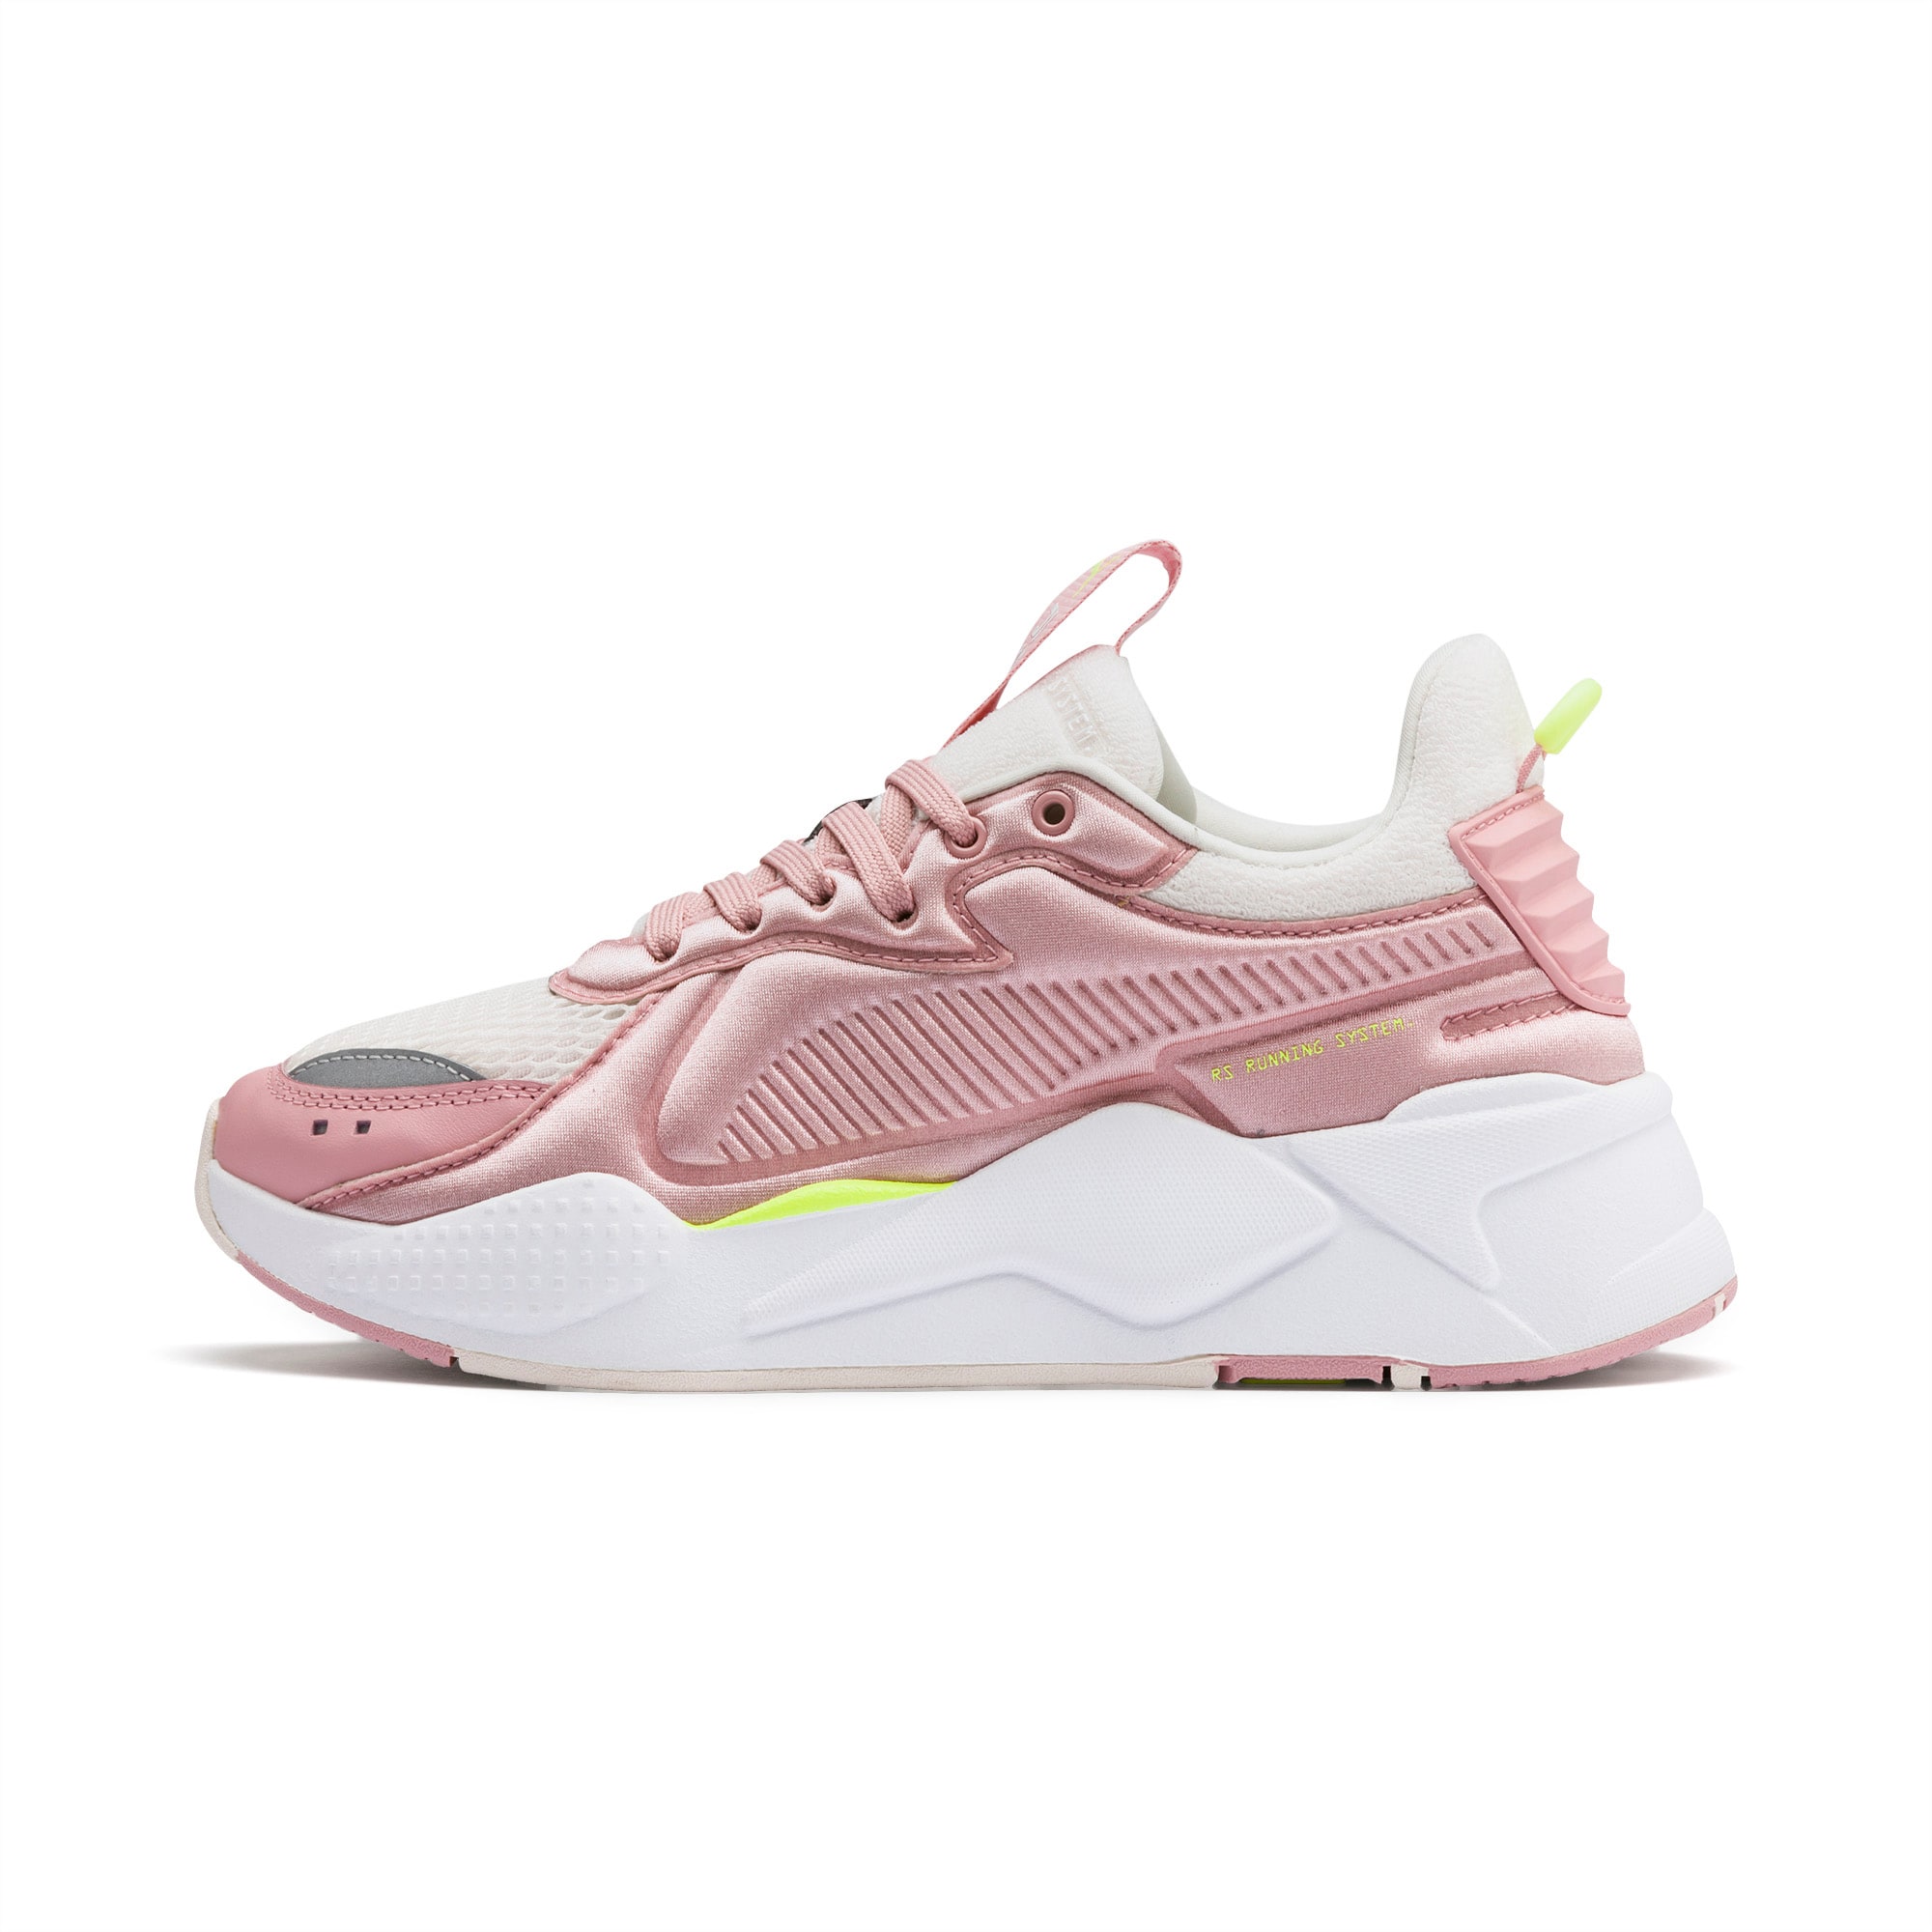 RS-X Softcase Trainers | Bridal Rose-Pastel Parchment | PUMA Sneakers | PUMA